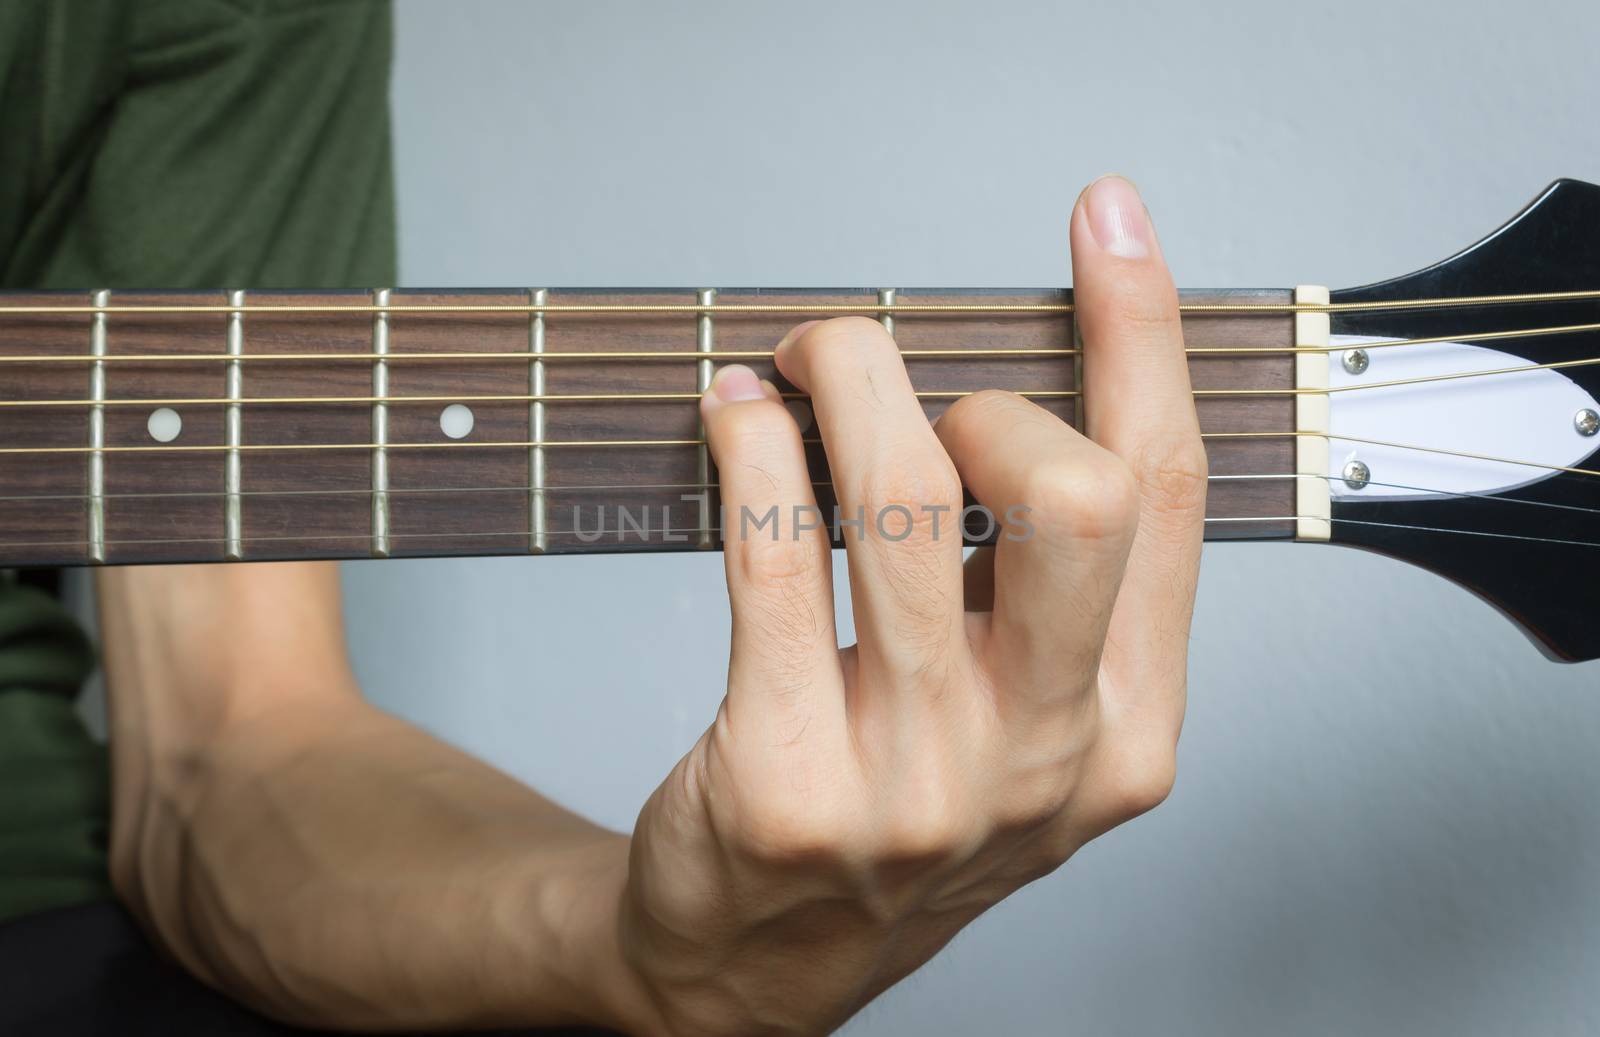 Guitar Player Hand or Musician Hand in F Major Chord on Acoustic Guitar String with soft natural light in close up view